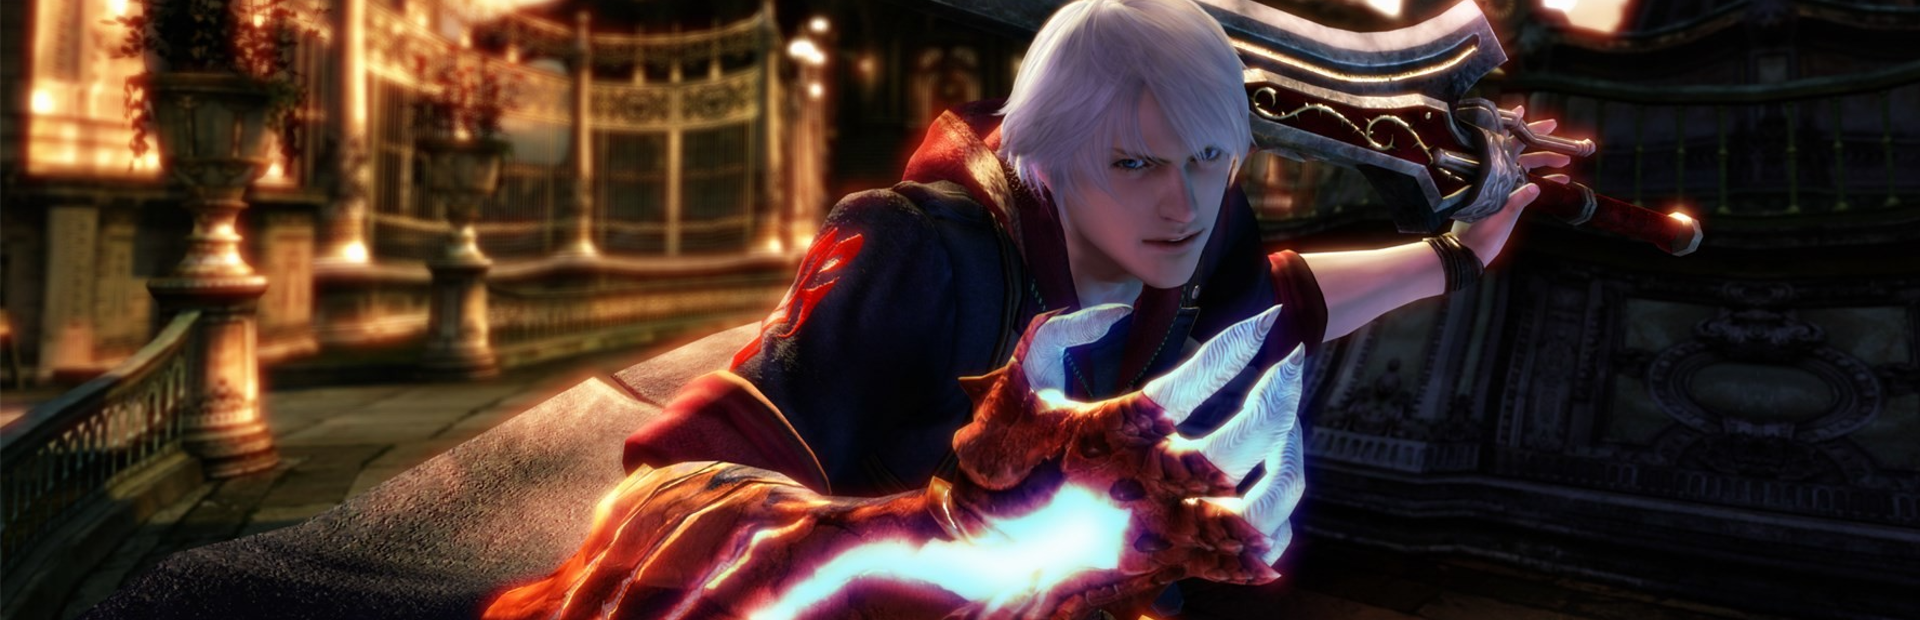 Devil May Cry 4 Special Edition - SteamGridDB